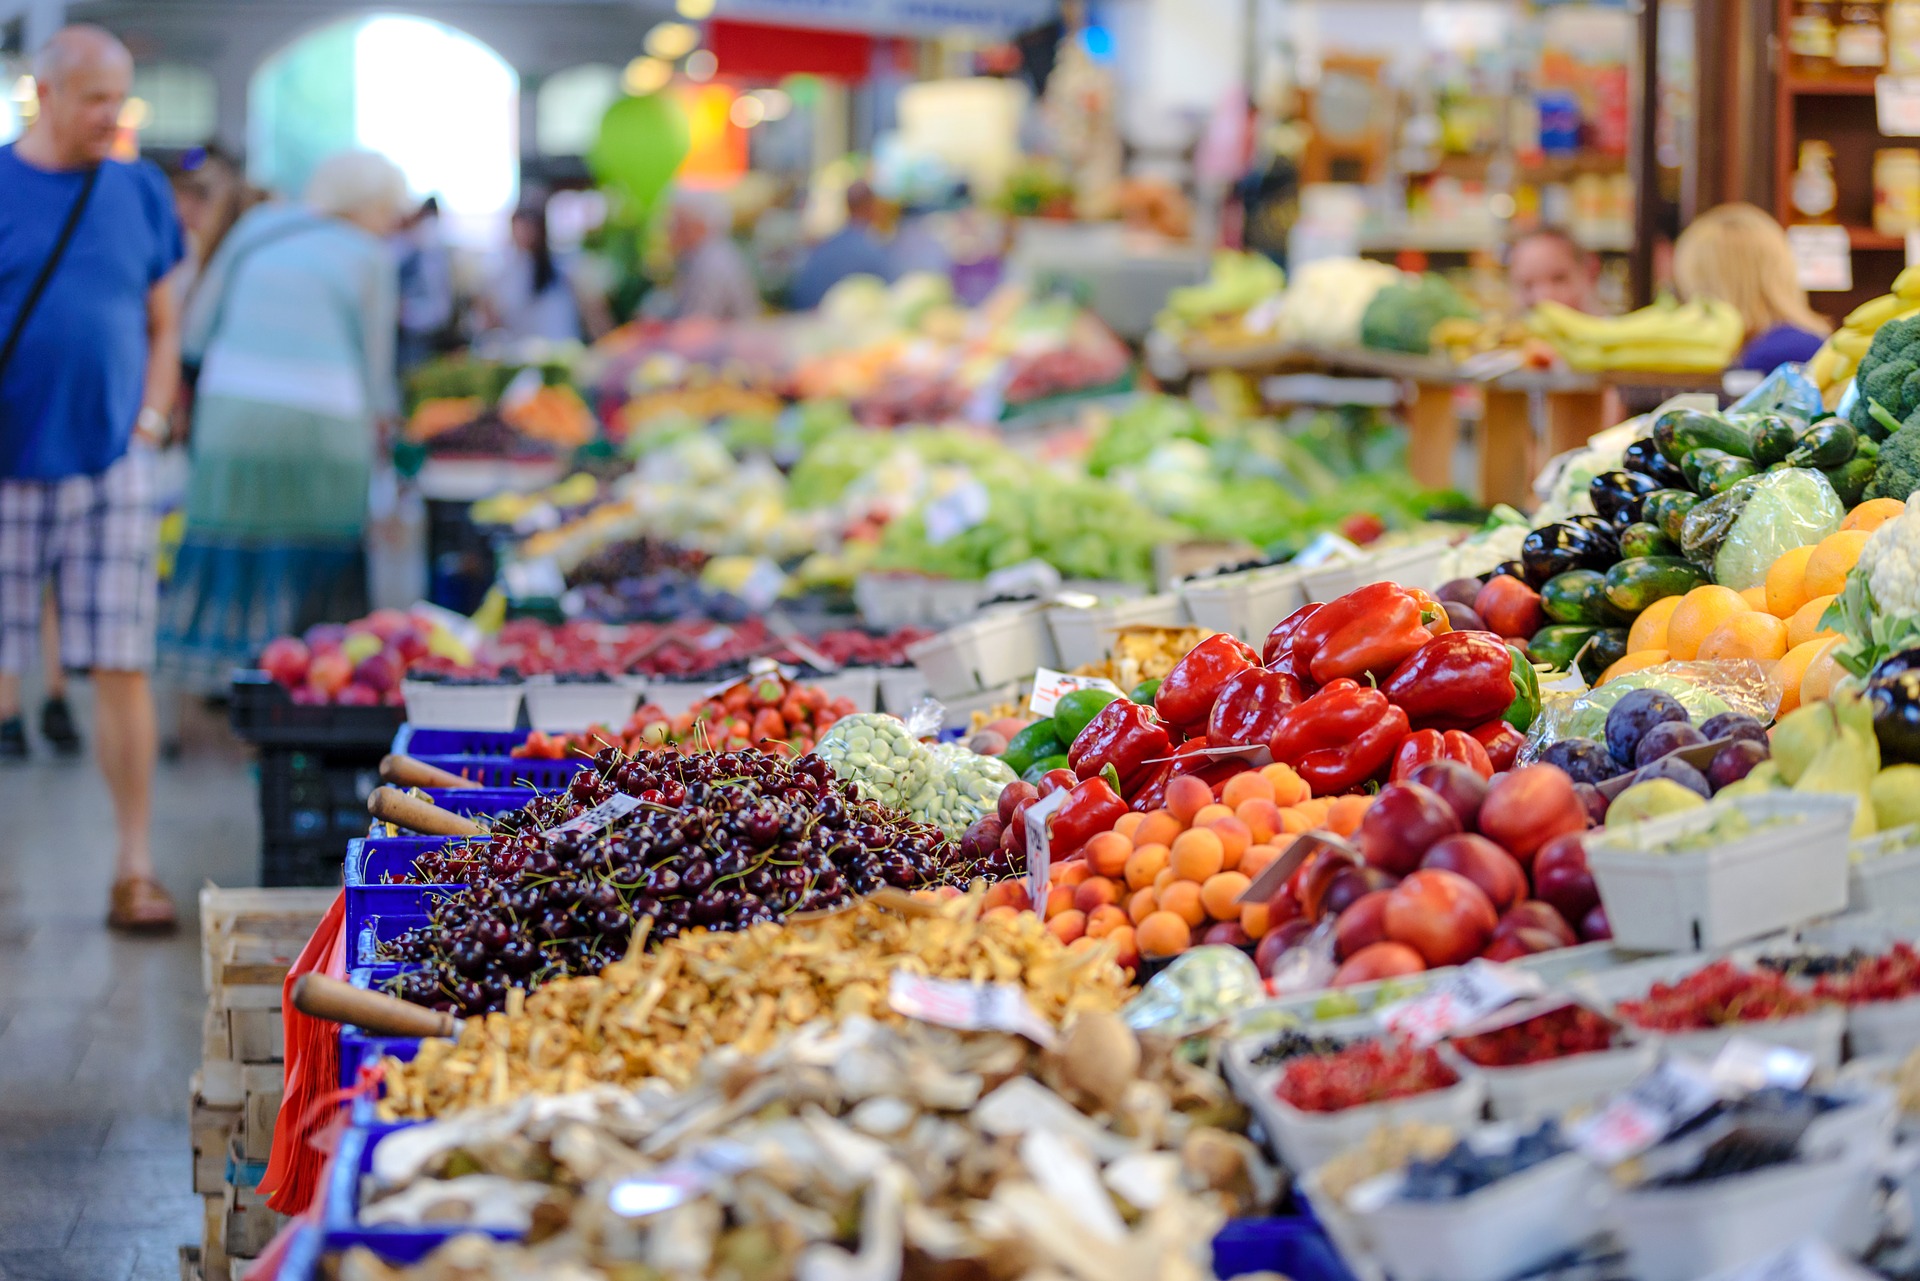 A view of a market stall with lots of colorful fruit and vegetables.